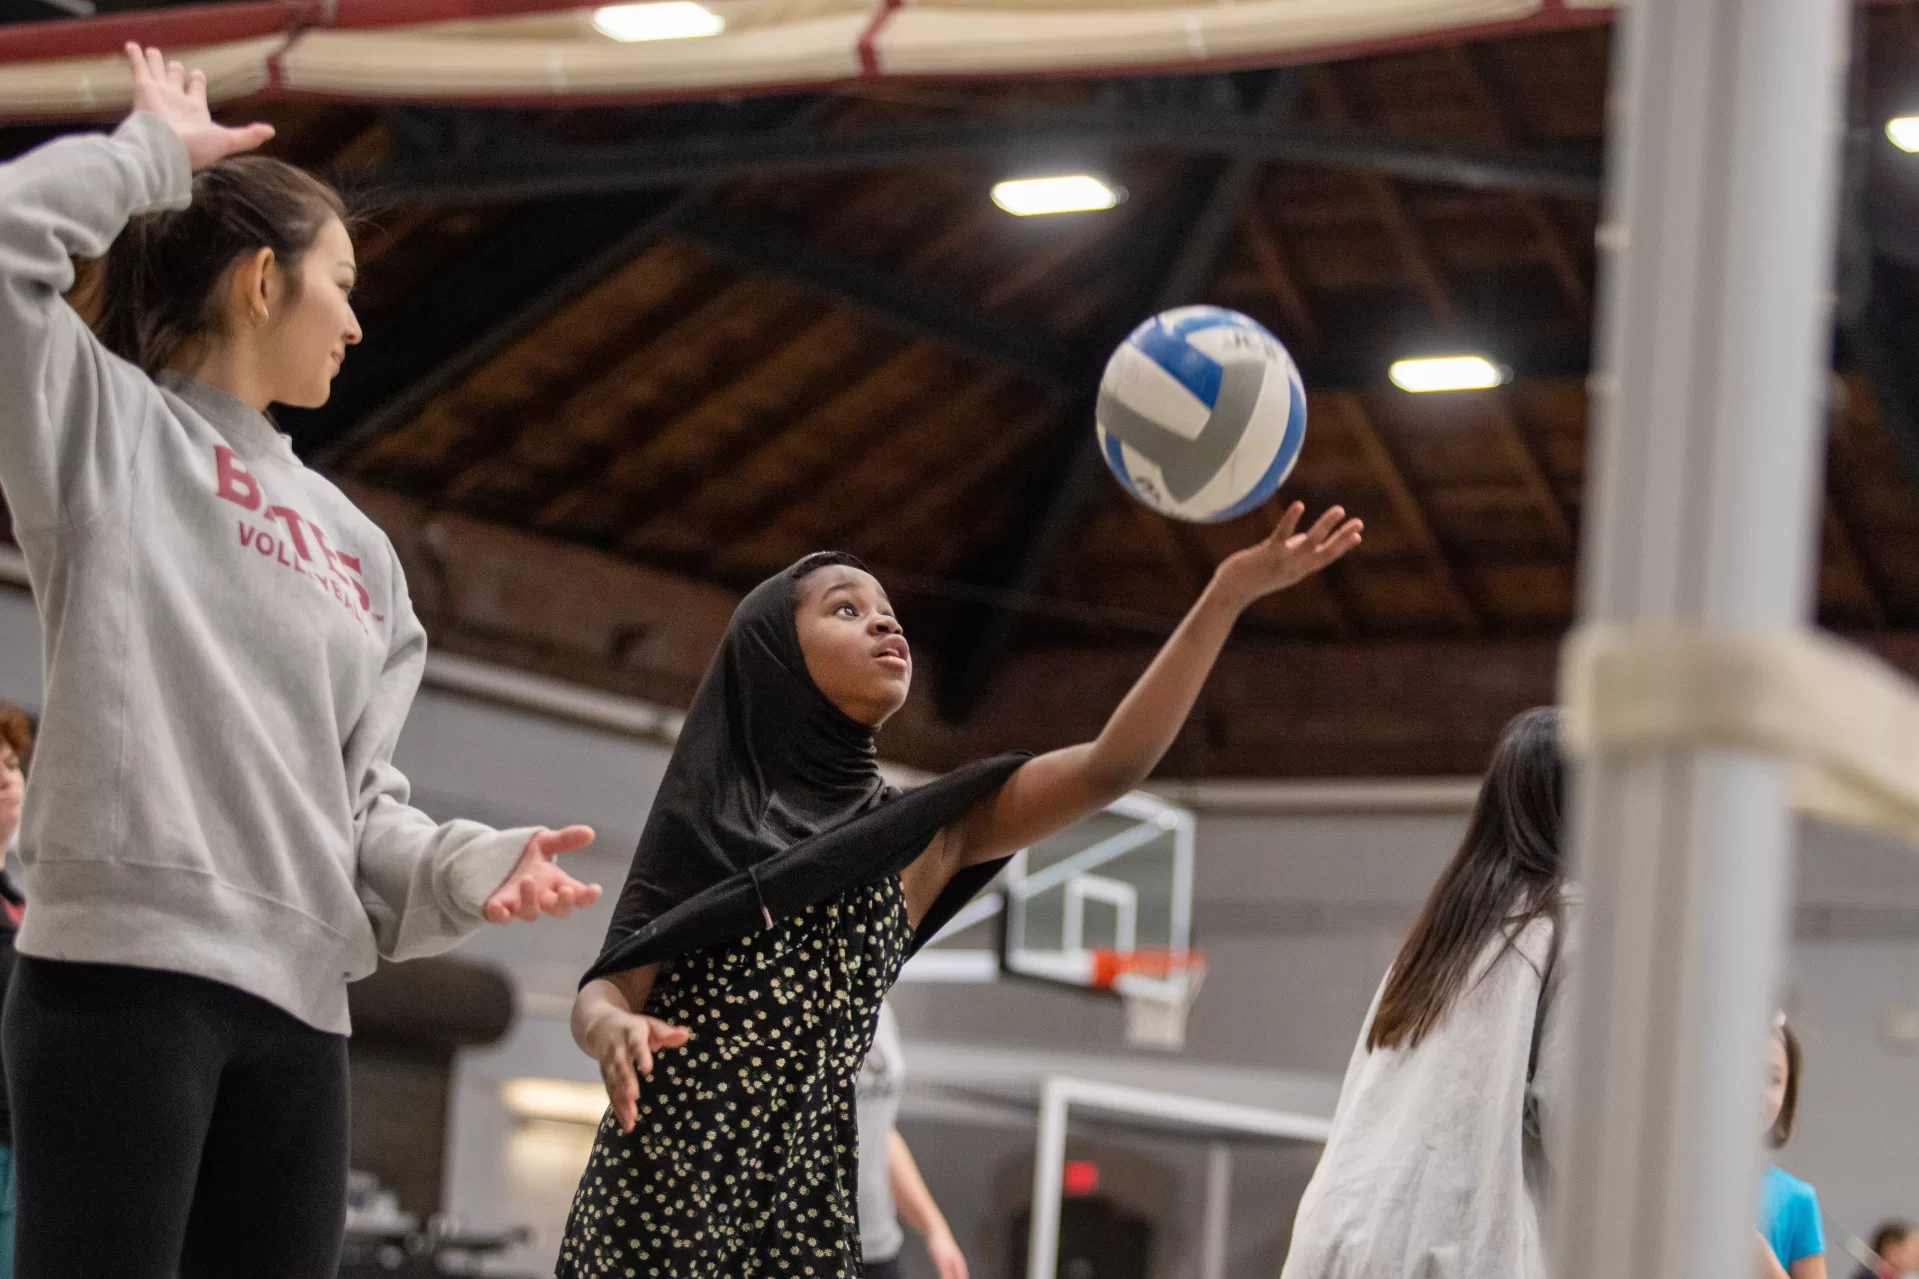 Students and coaches from Bates' women's sports teams gathered in Gray Cage on Feb. 3 to teach community kids on National Girls and Women in Sports Day.